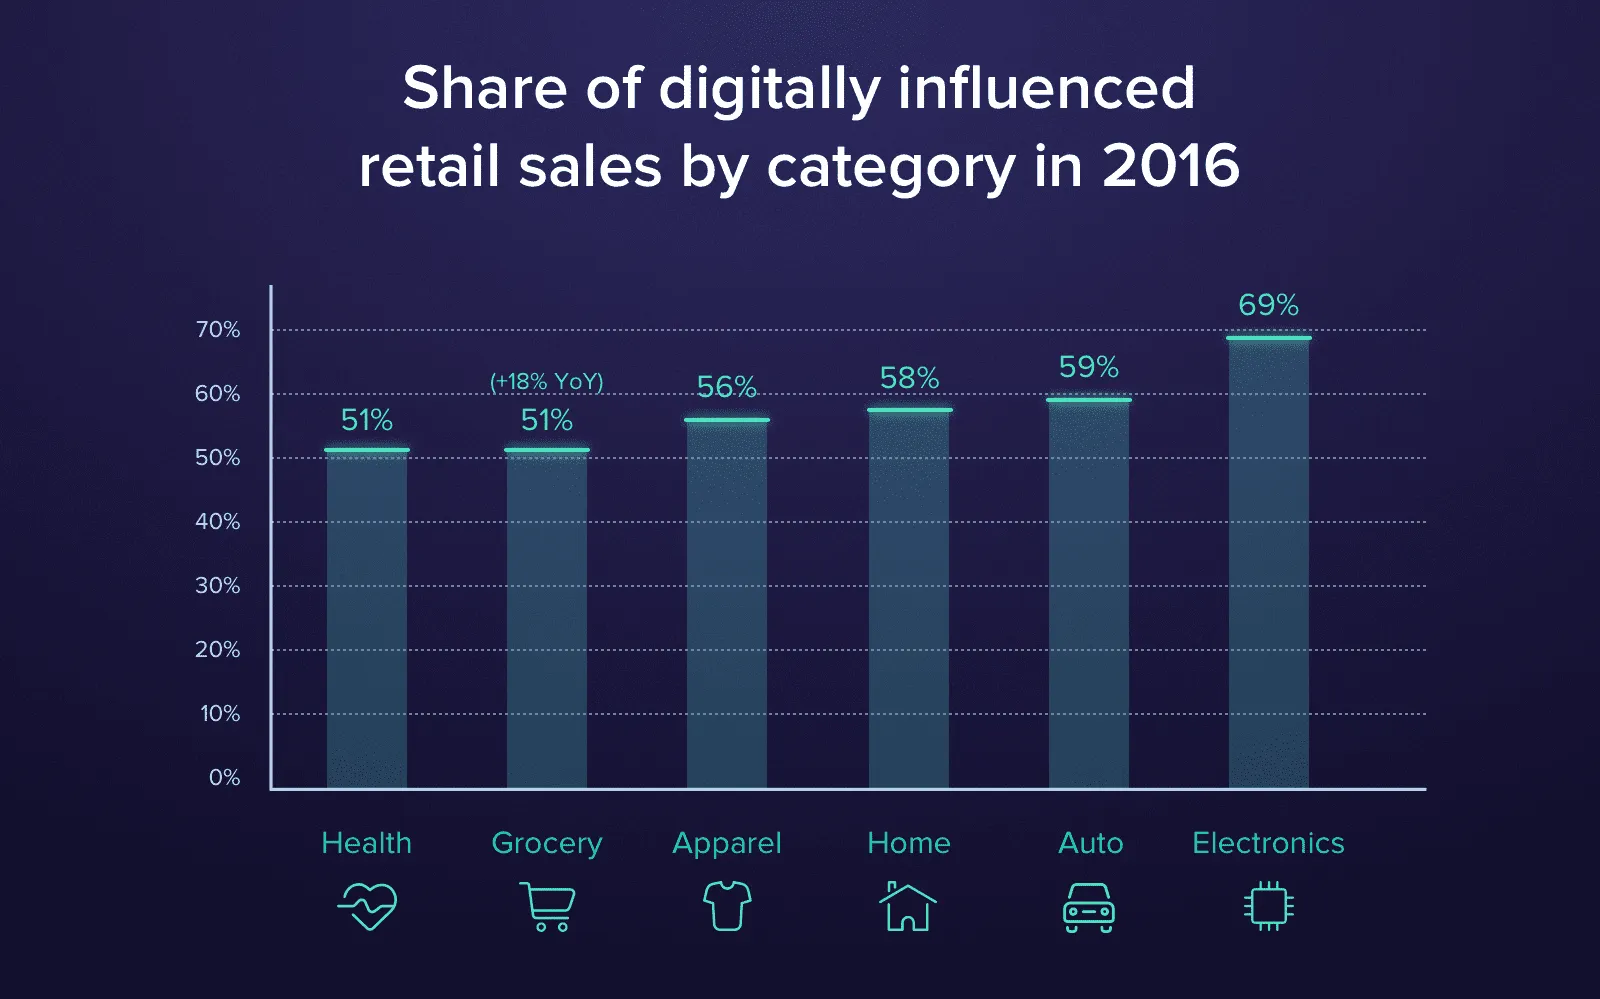 Share of digitally influenced retail sales by category in 2016